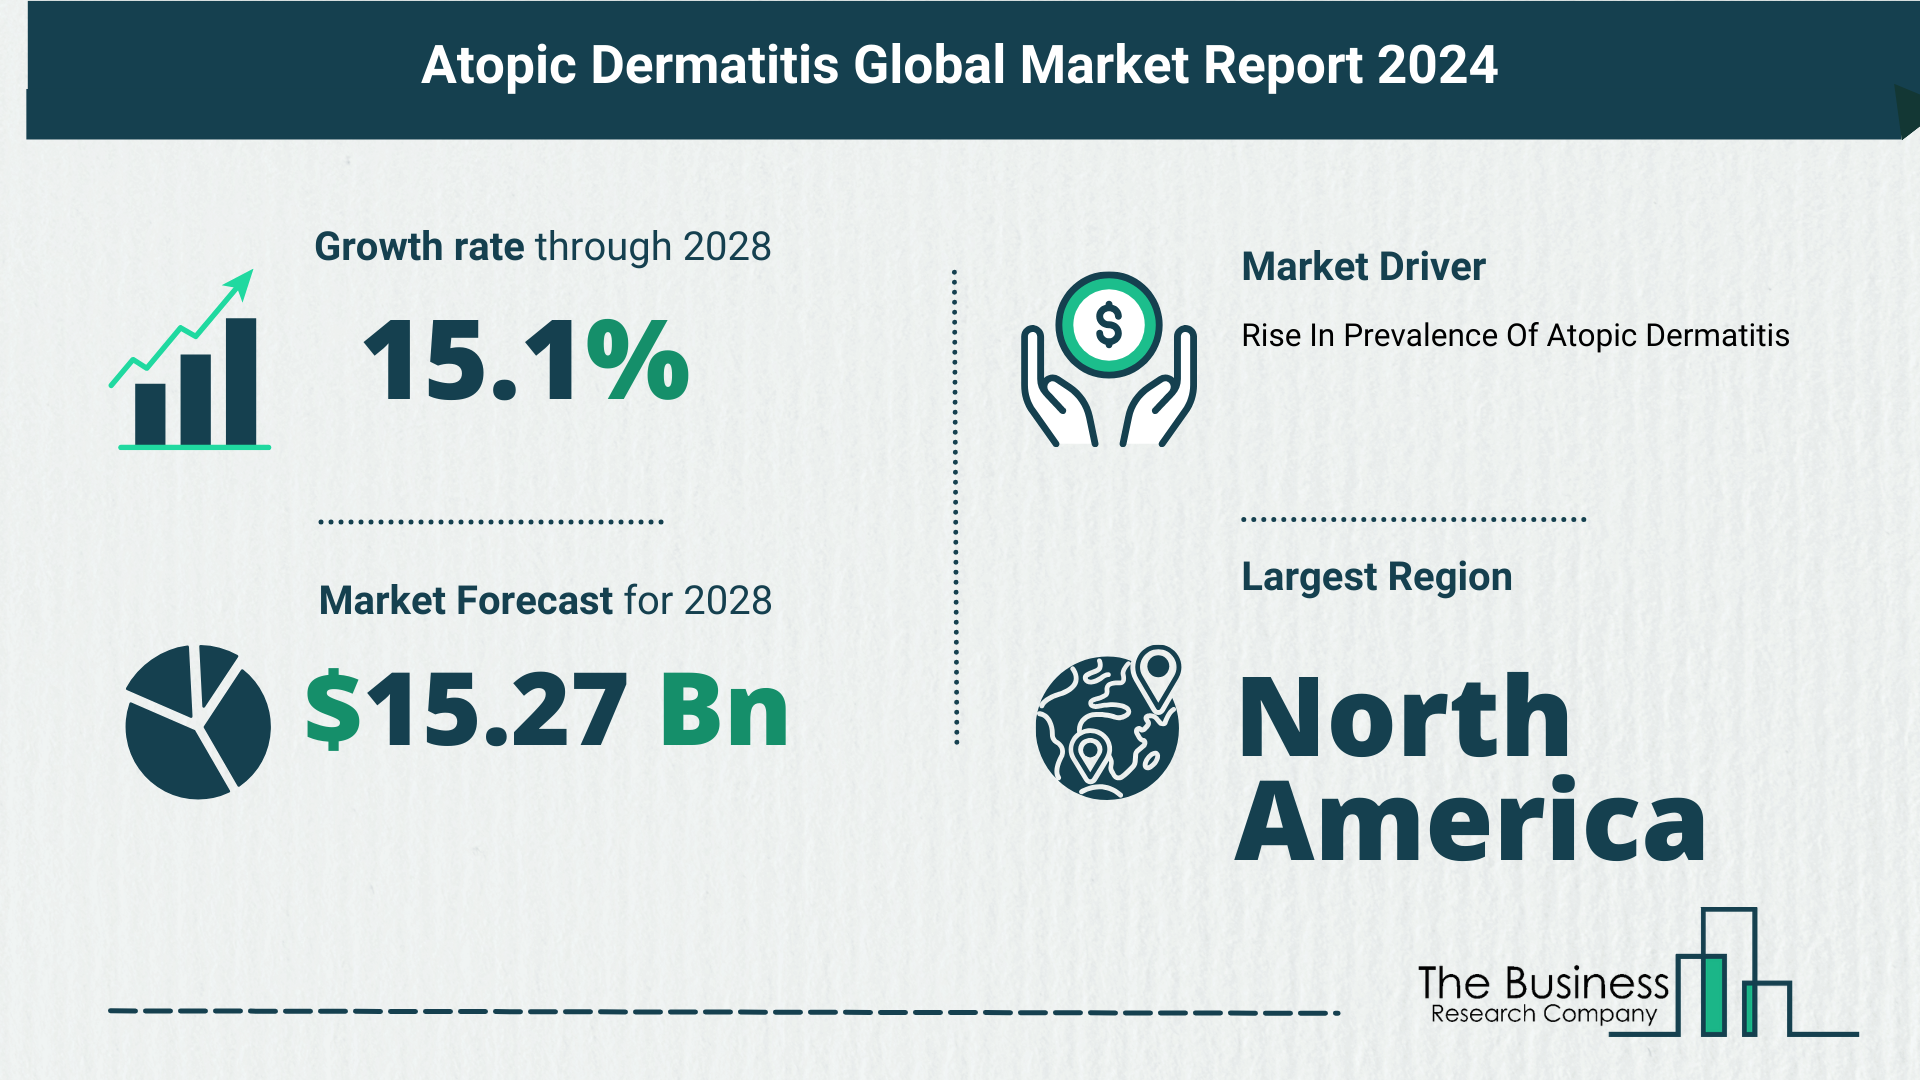 Key Insights On The Atopic Dermatitis Market 2024 – Size, Driver, And Major Players